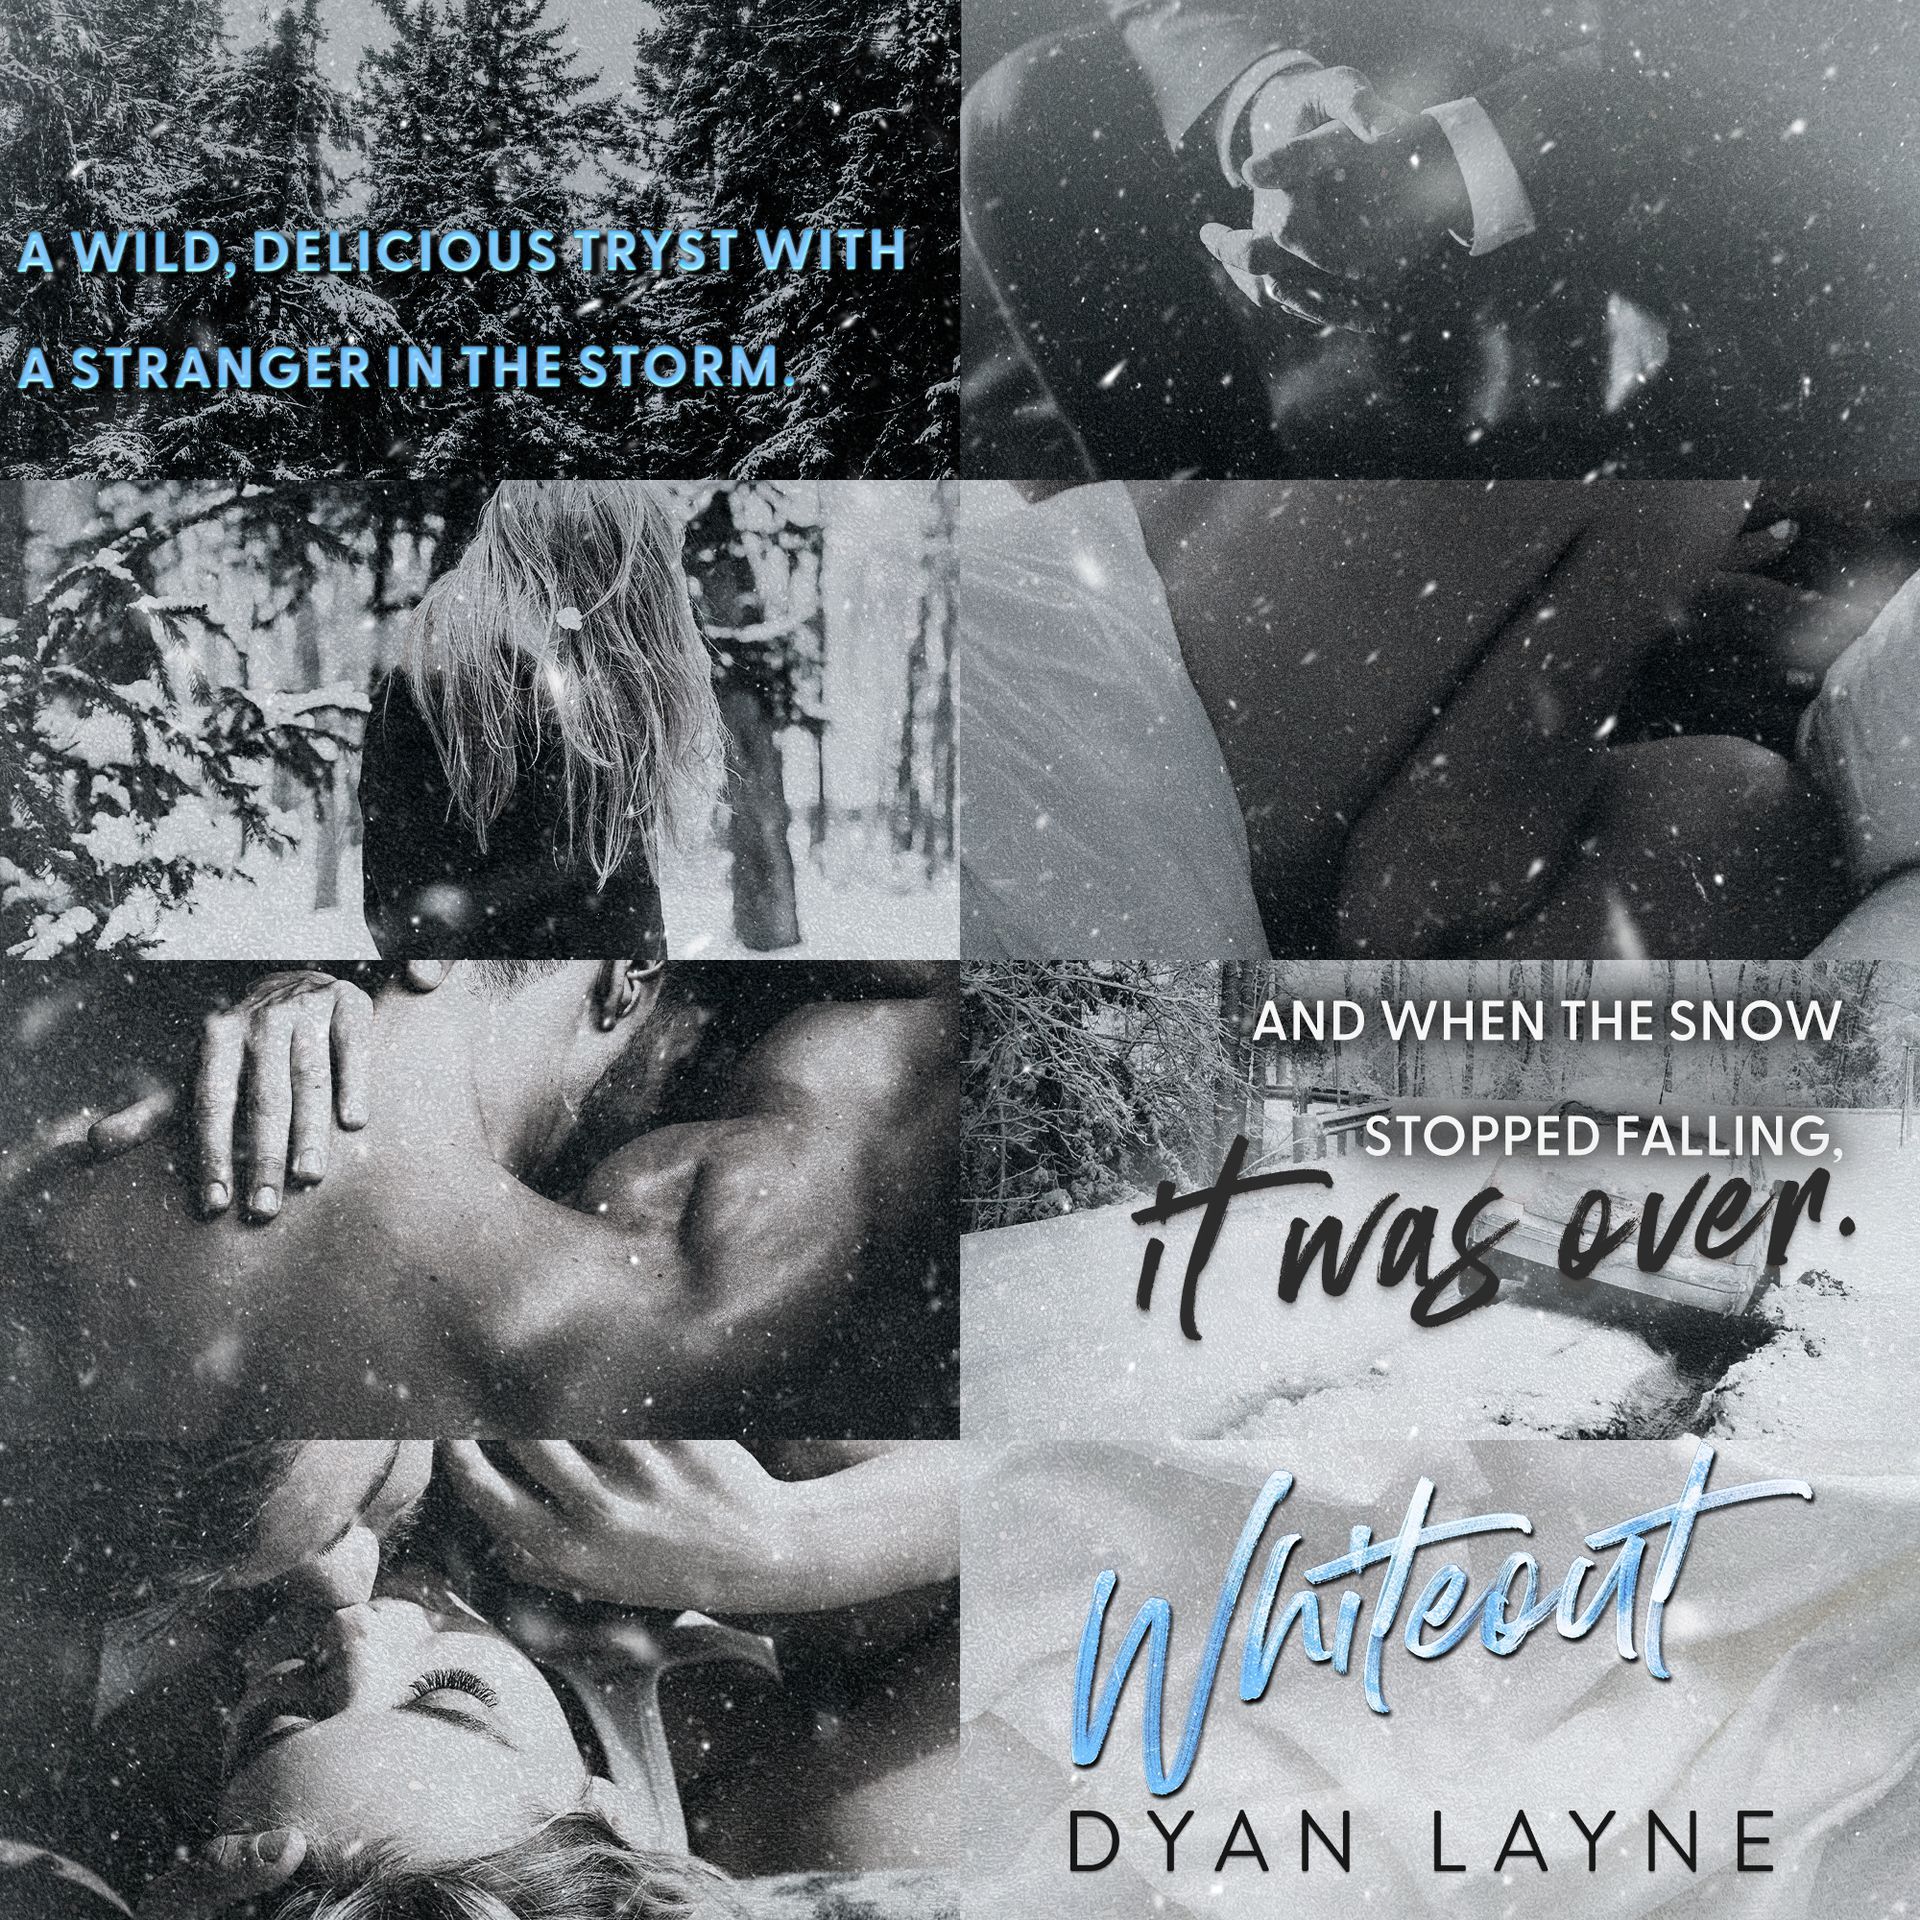 A poster for a book called whiteout by dyan layne